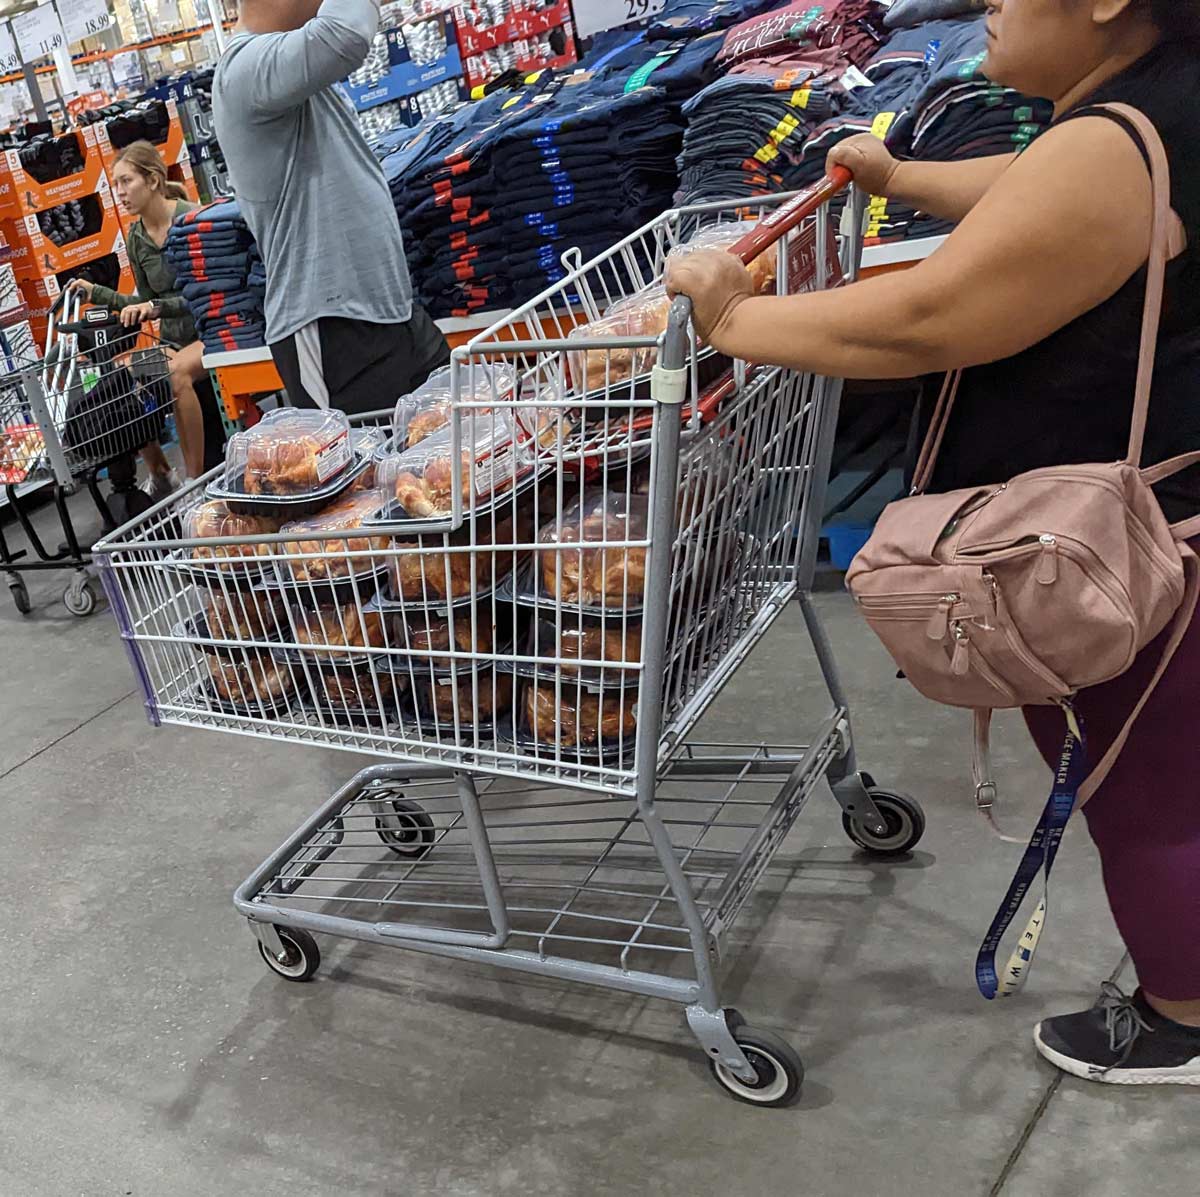 Went to Costco to grab a rotisserie chicken for the weekend, but this lady beat everyone to it